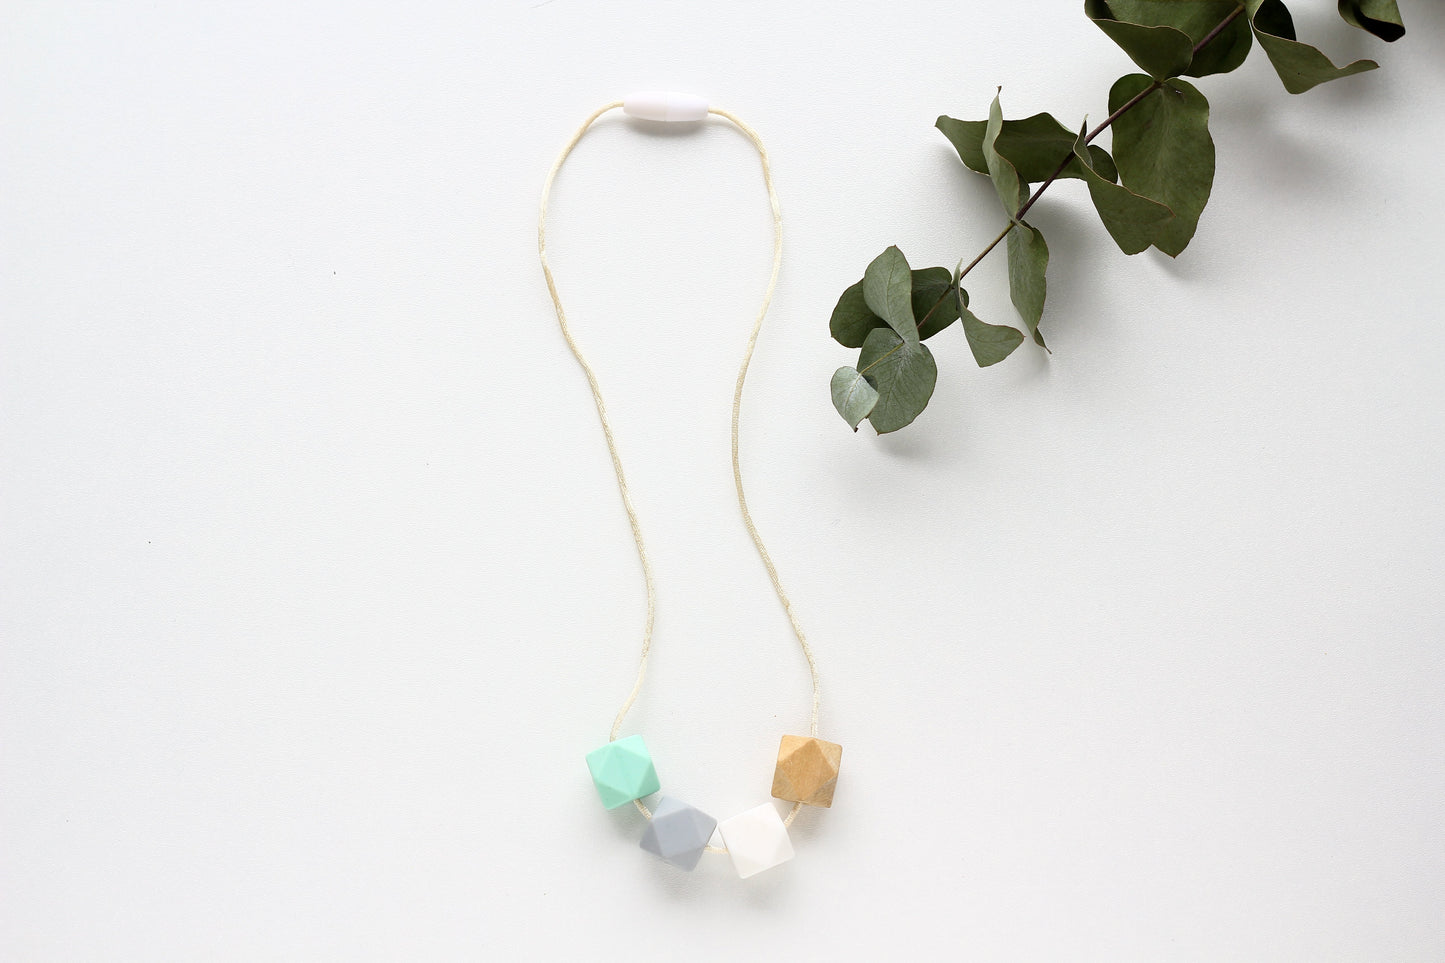 Peach - Nursing Necklace in non-toxic wood & silicone!.